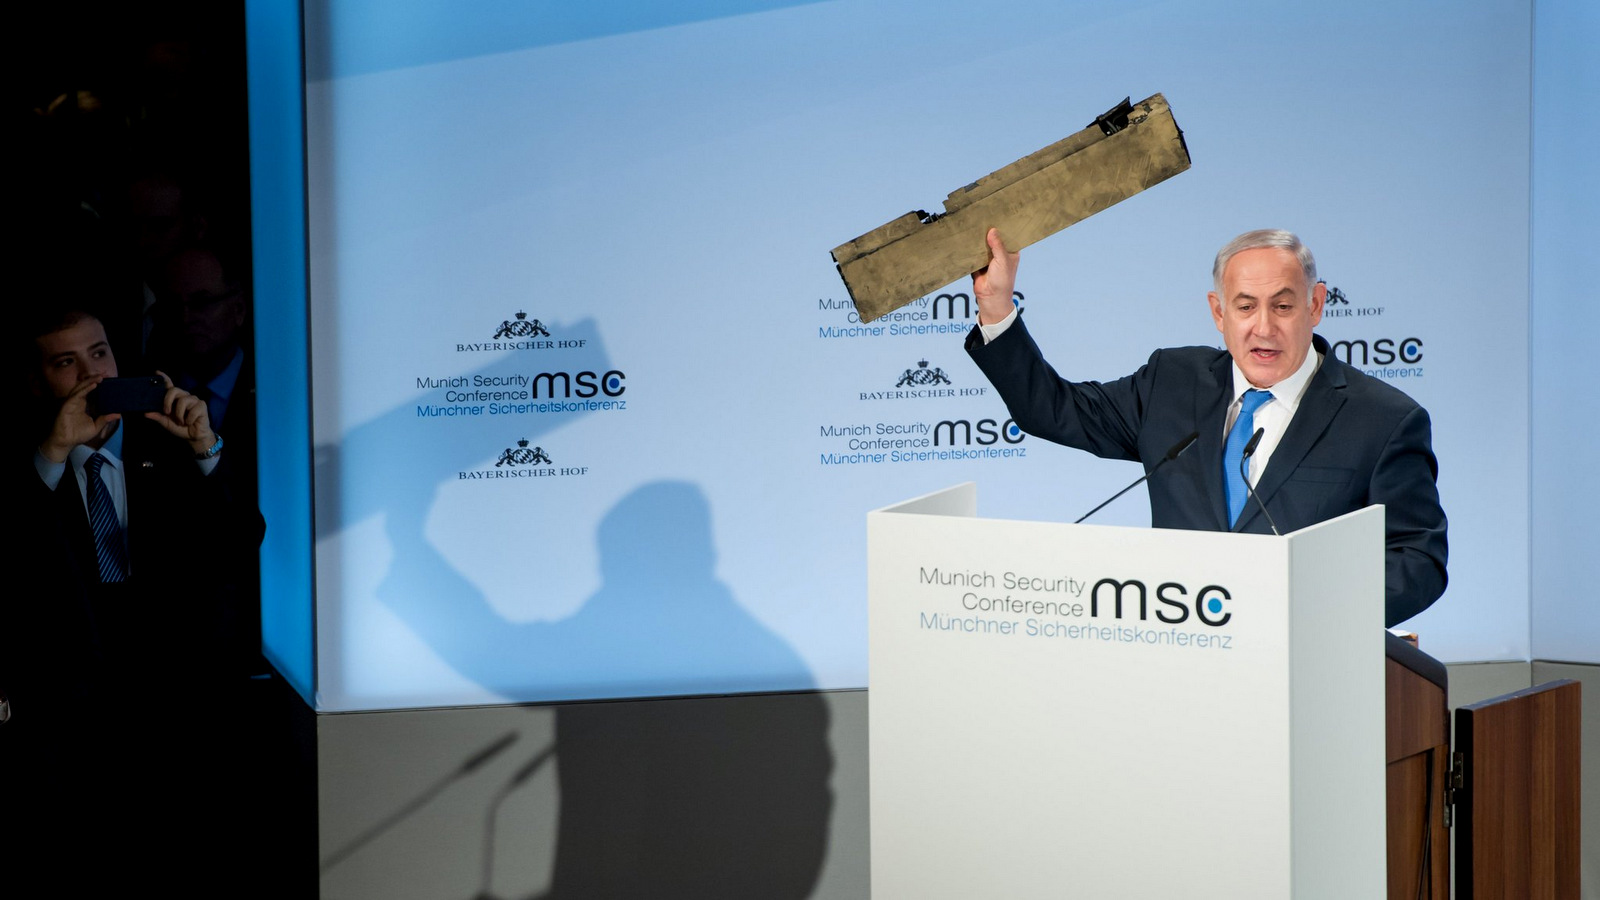 Prime Minister Benjamin Netanyahu of Israel, displays what he alleges is a remnant of an Iranian drone shot down over Israeli airspace at the Munich Security Conference in Germany. (Lennart Preiss/Reuters)